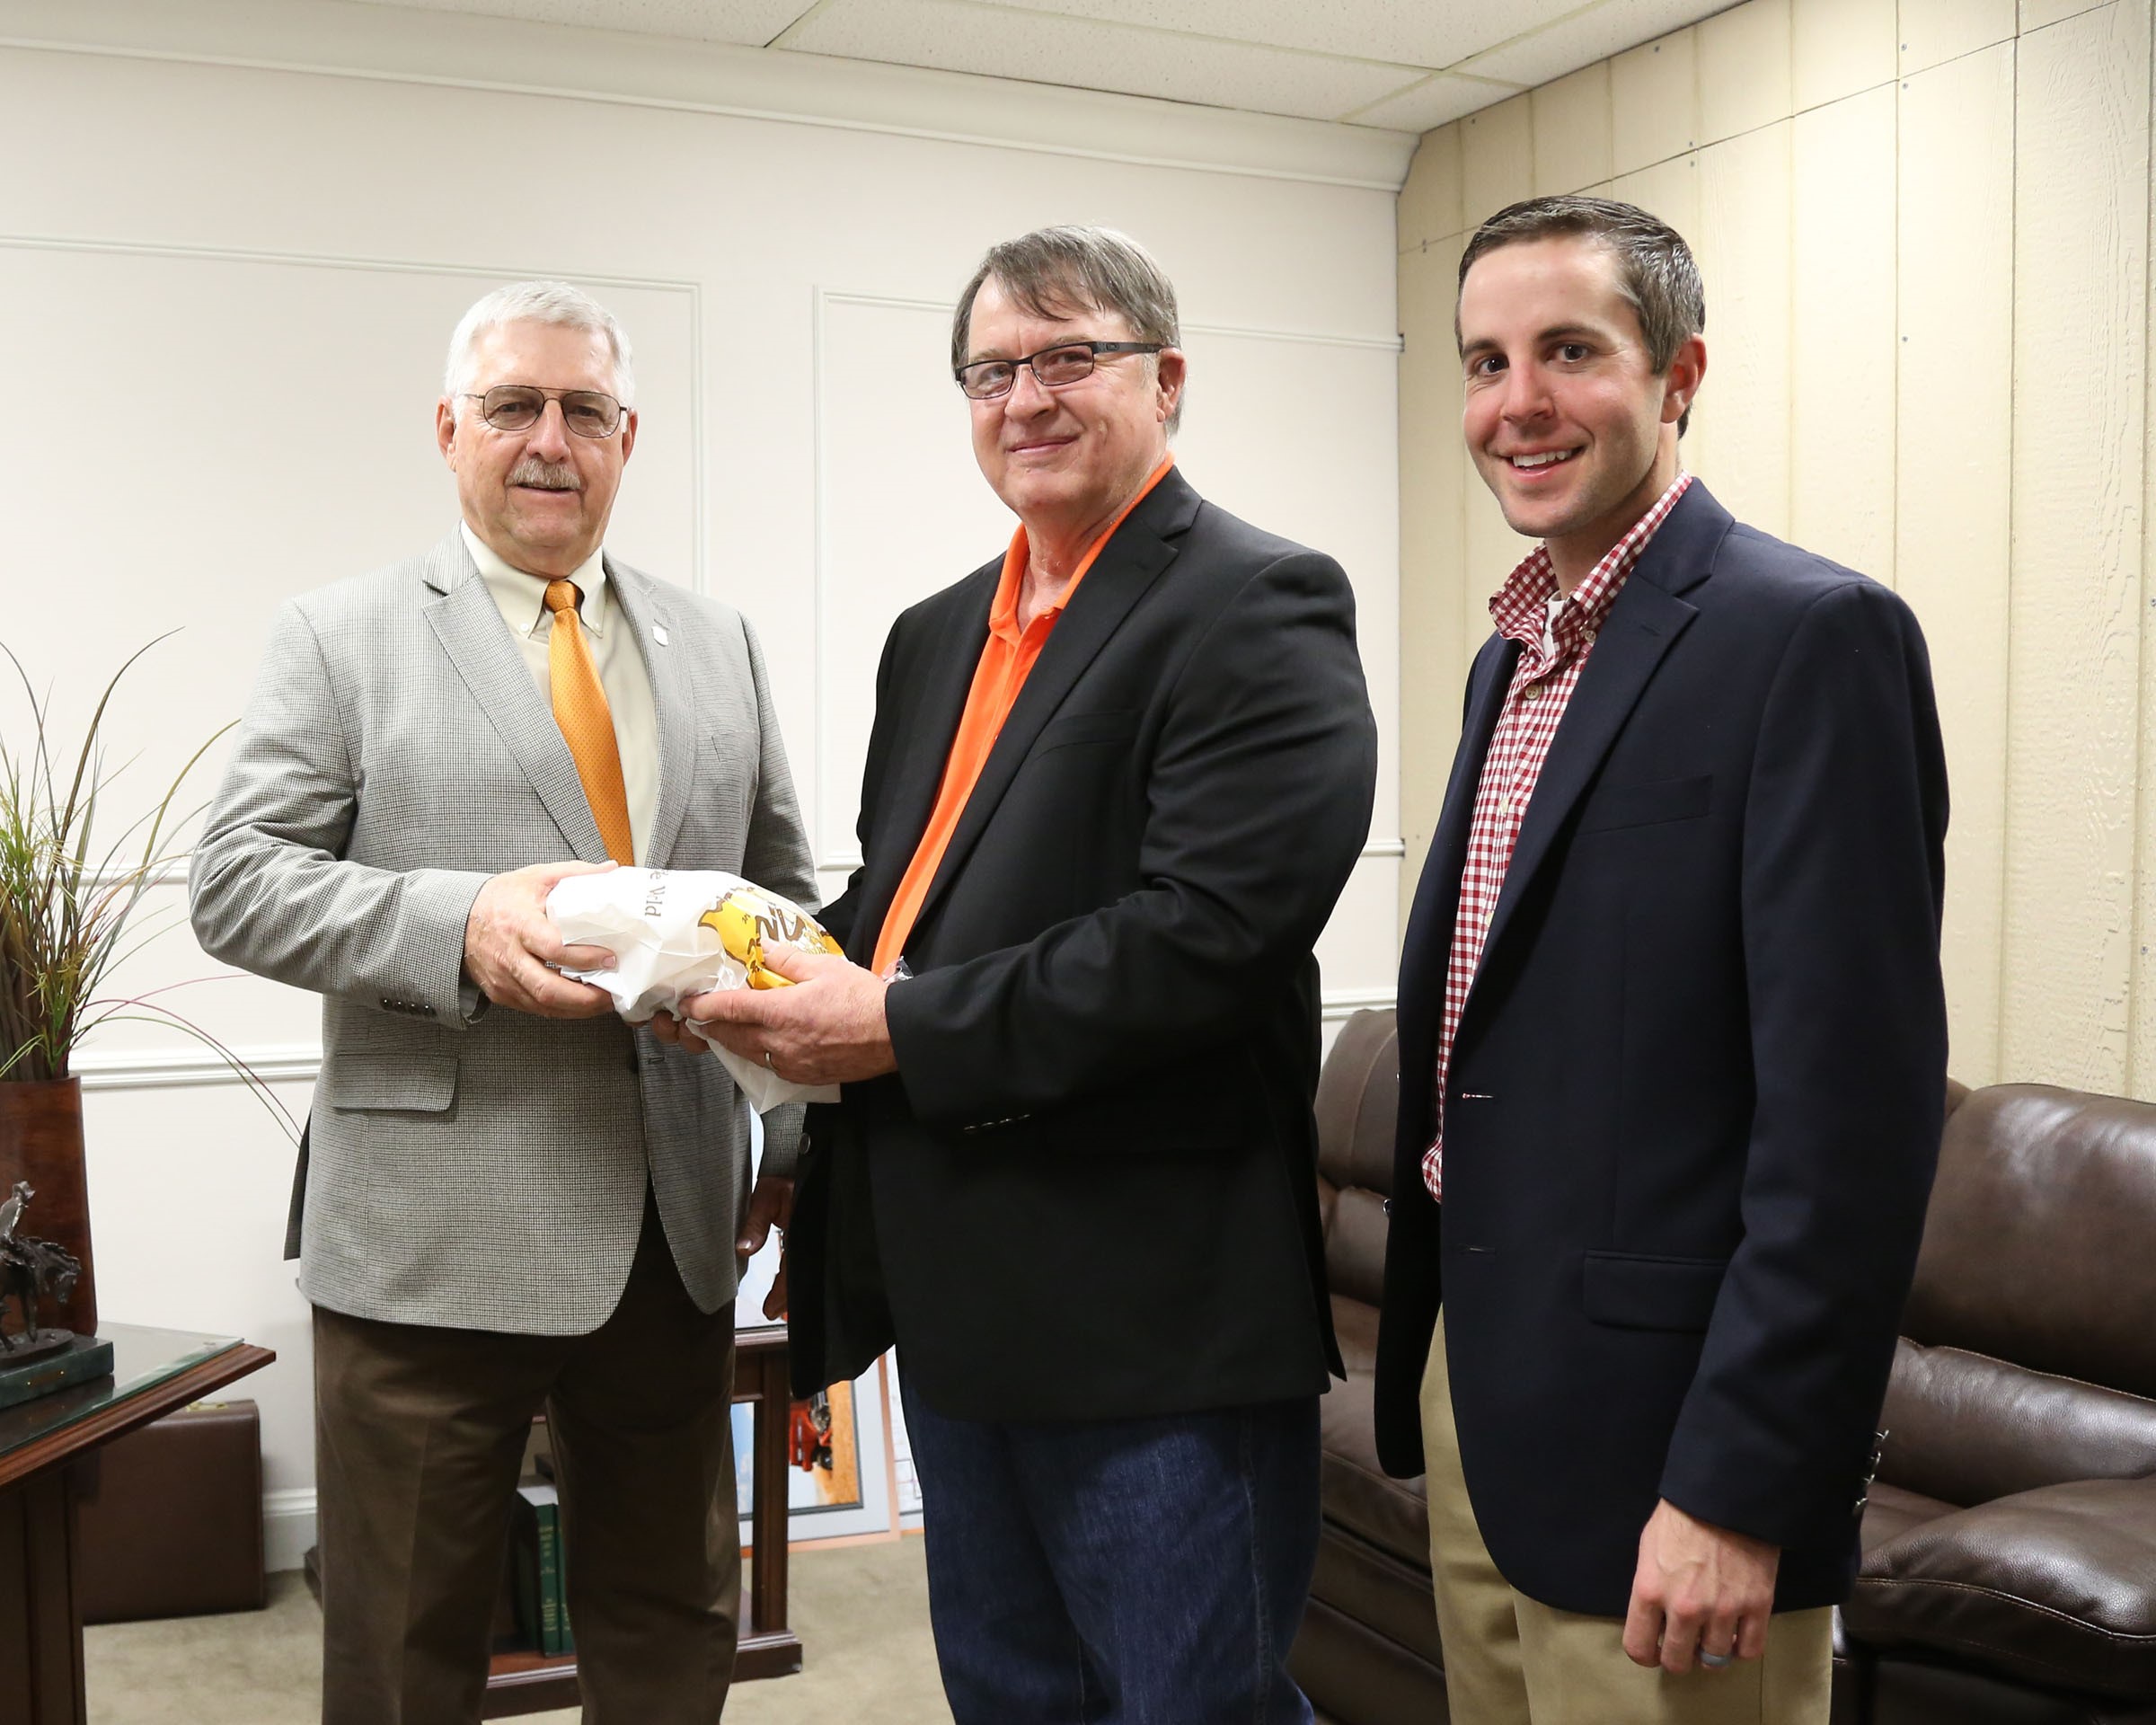 Senator Roland Peterson, R-Burlington, (left) welcomes delegates of the Oklahoma  Wheat Growers Association, RJ Parrish of Hunter (center) and Travis Schnaithman of Garber in  his office last week.  Parrish and Schnaithman helped deliver Oklahoma-made bread to  legislators for the annual Wheat Day at the Capitol.